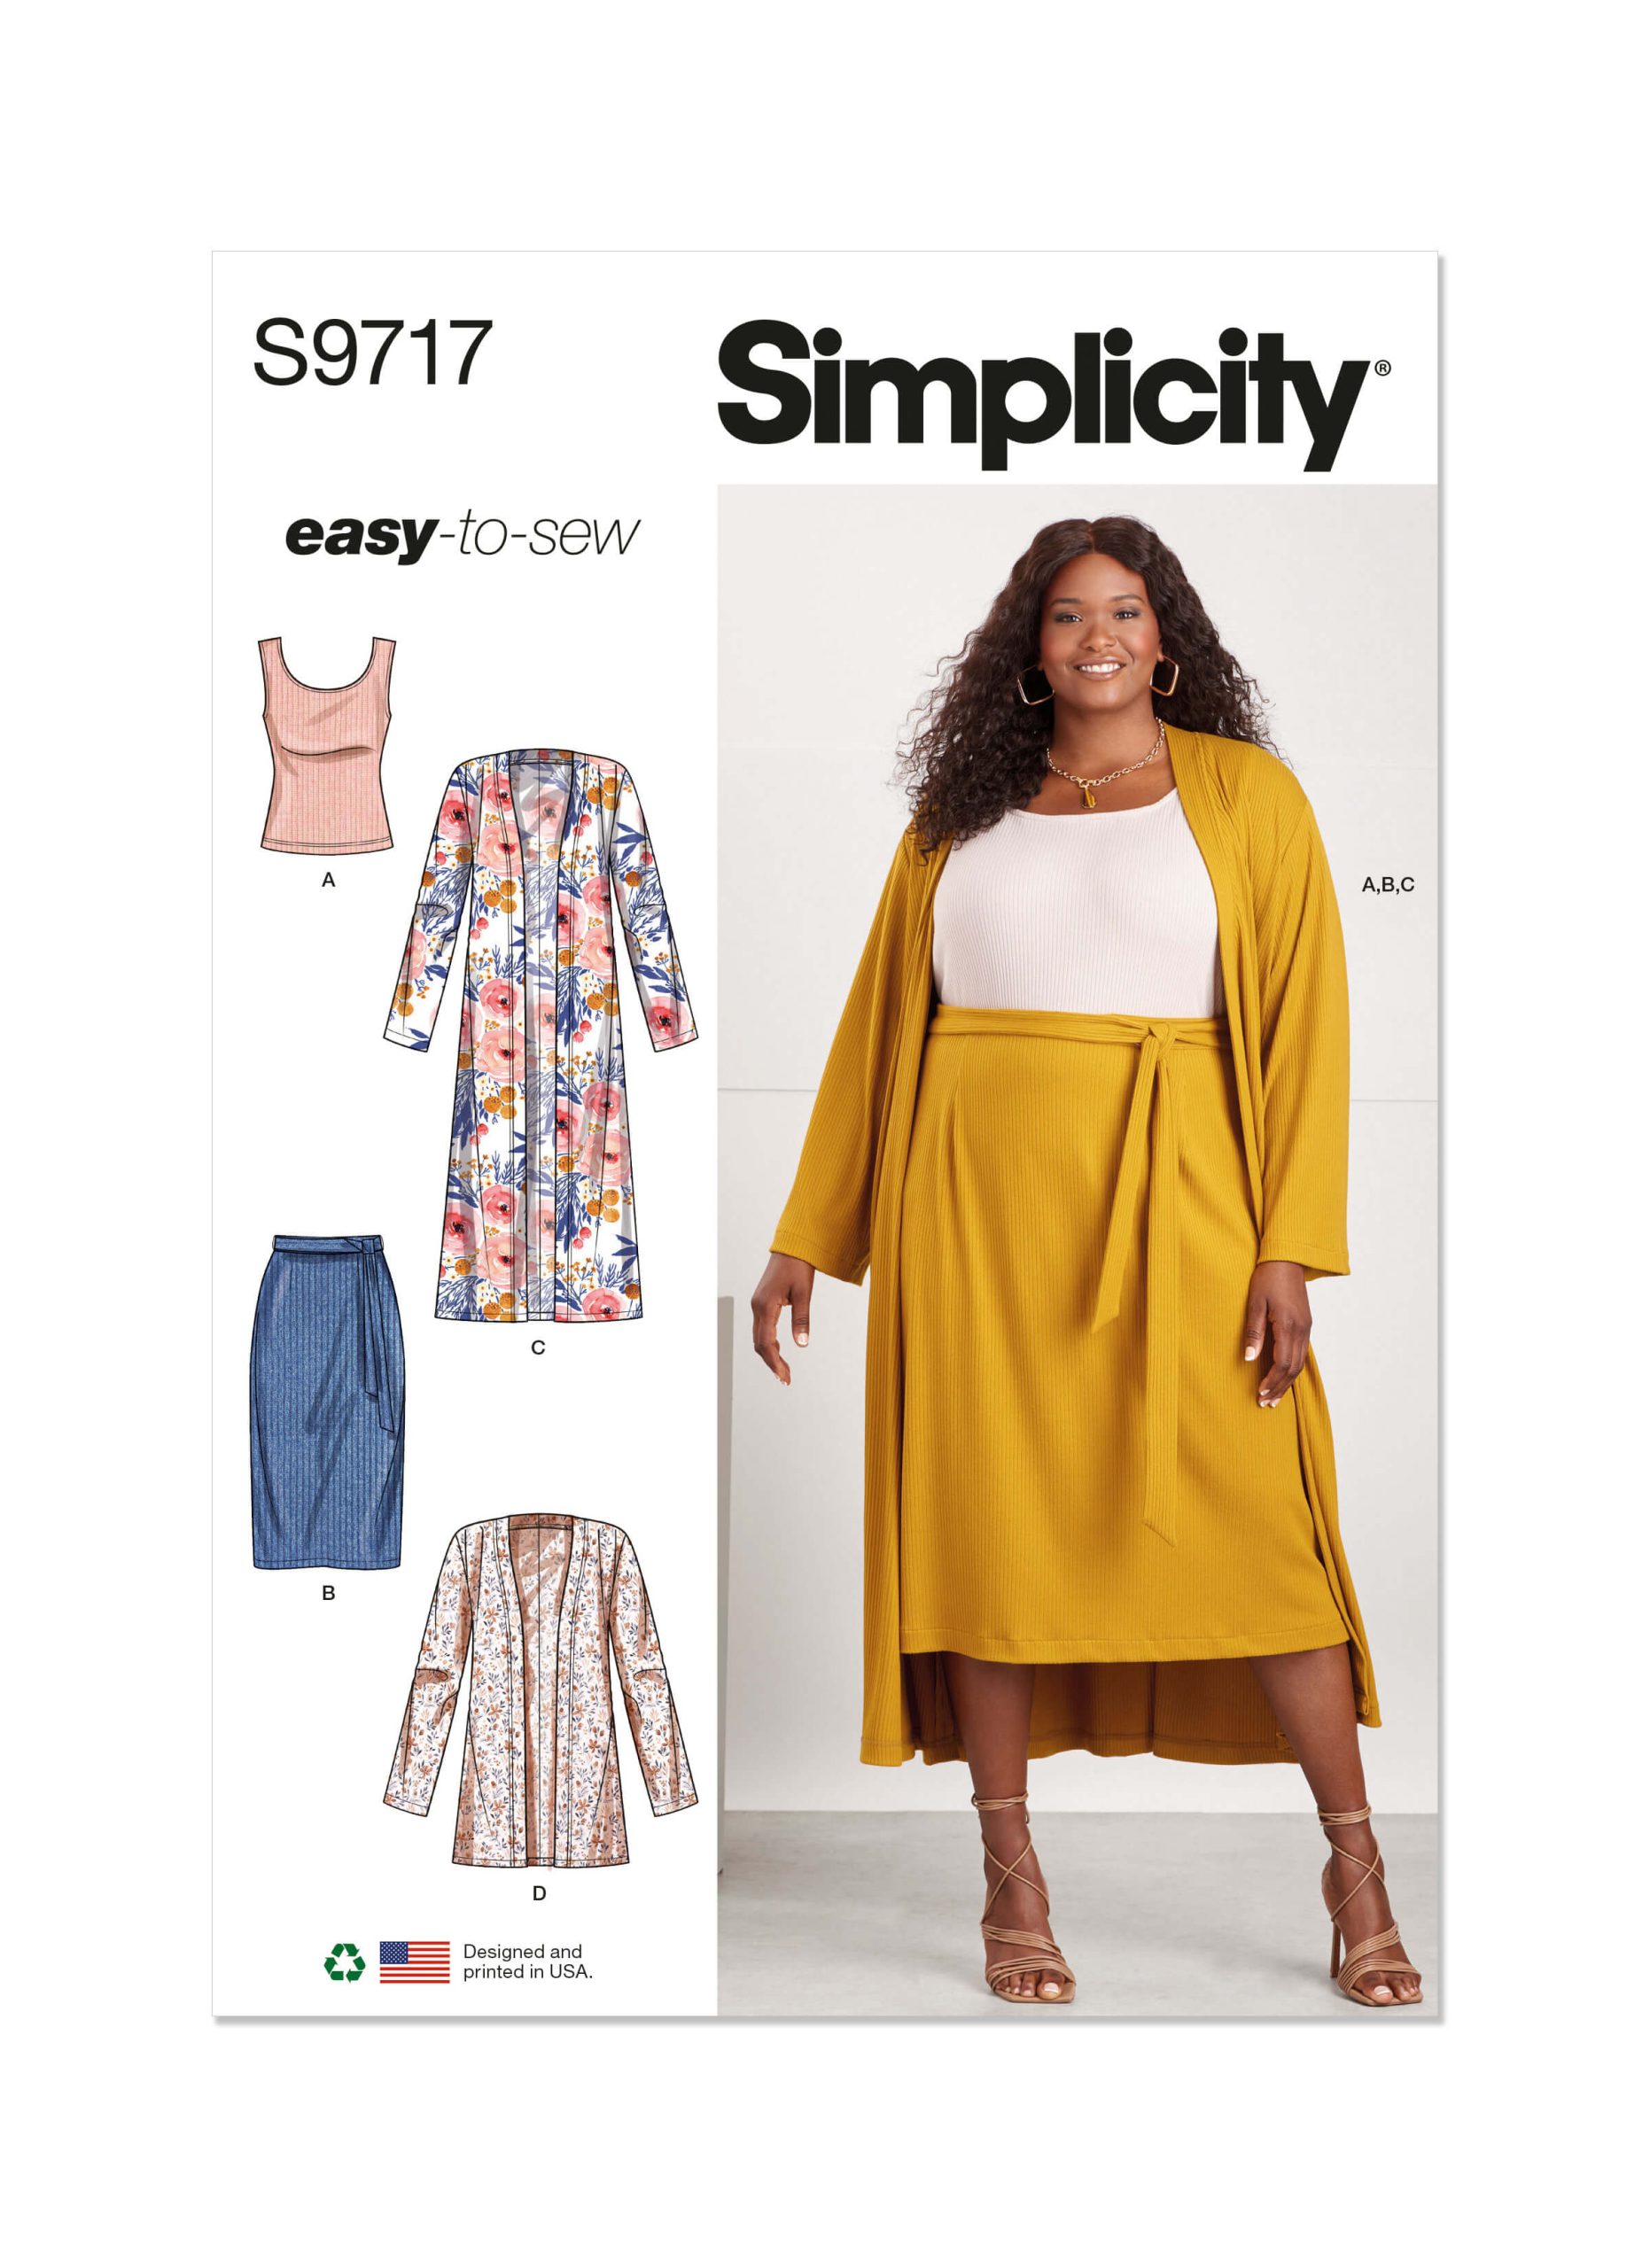 Simplicity Sewing Pattern S9717 Women's Co-ordinate Knit Top, Cardigan and Skirt